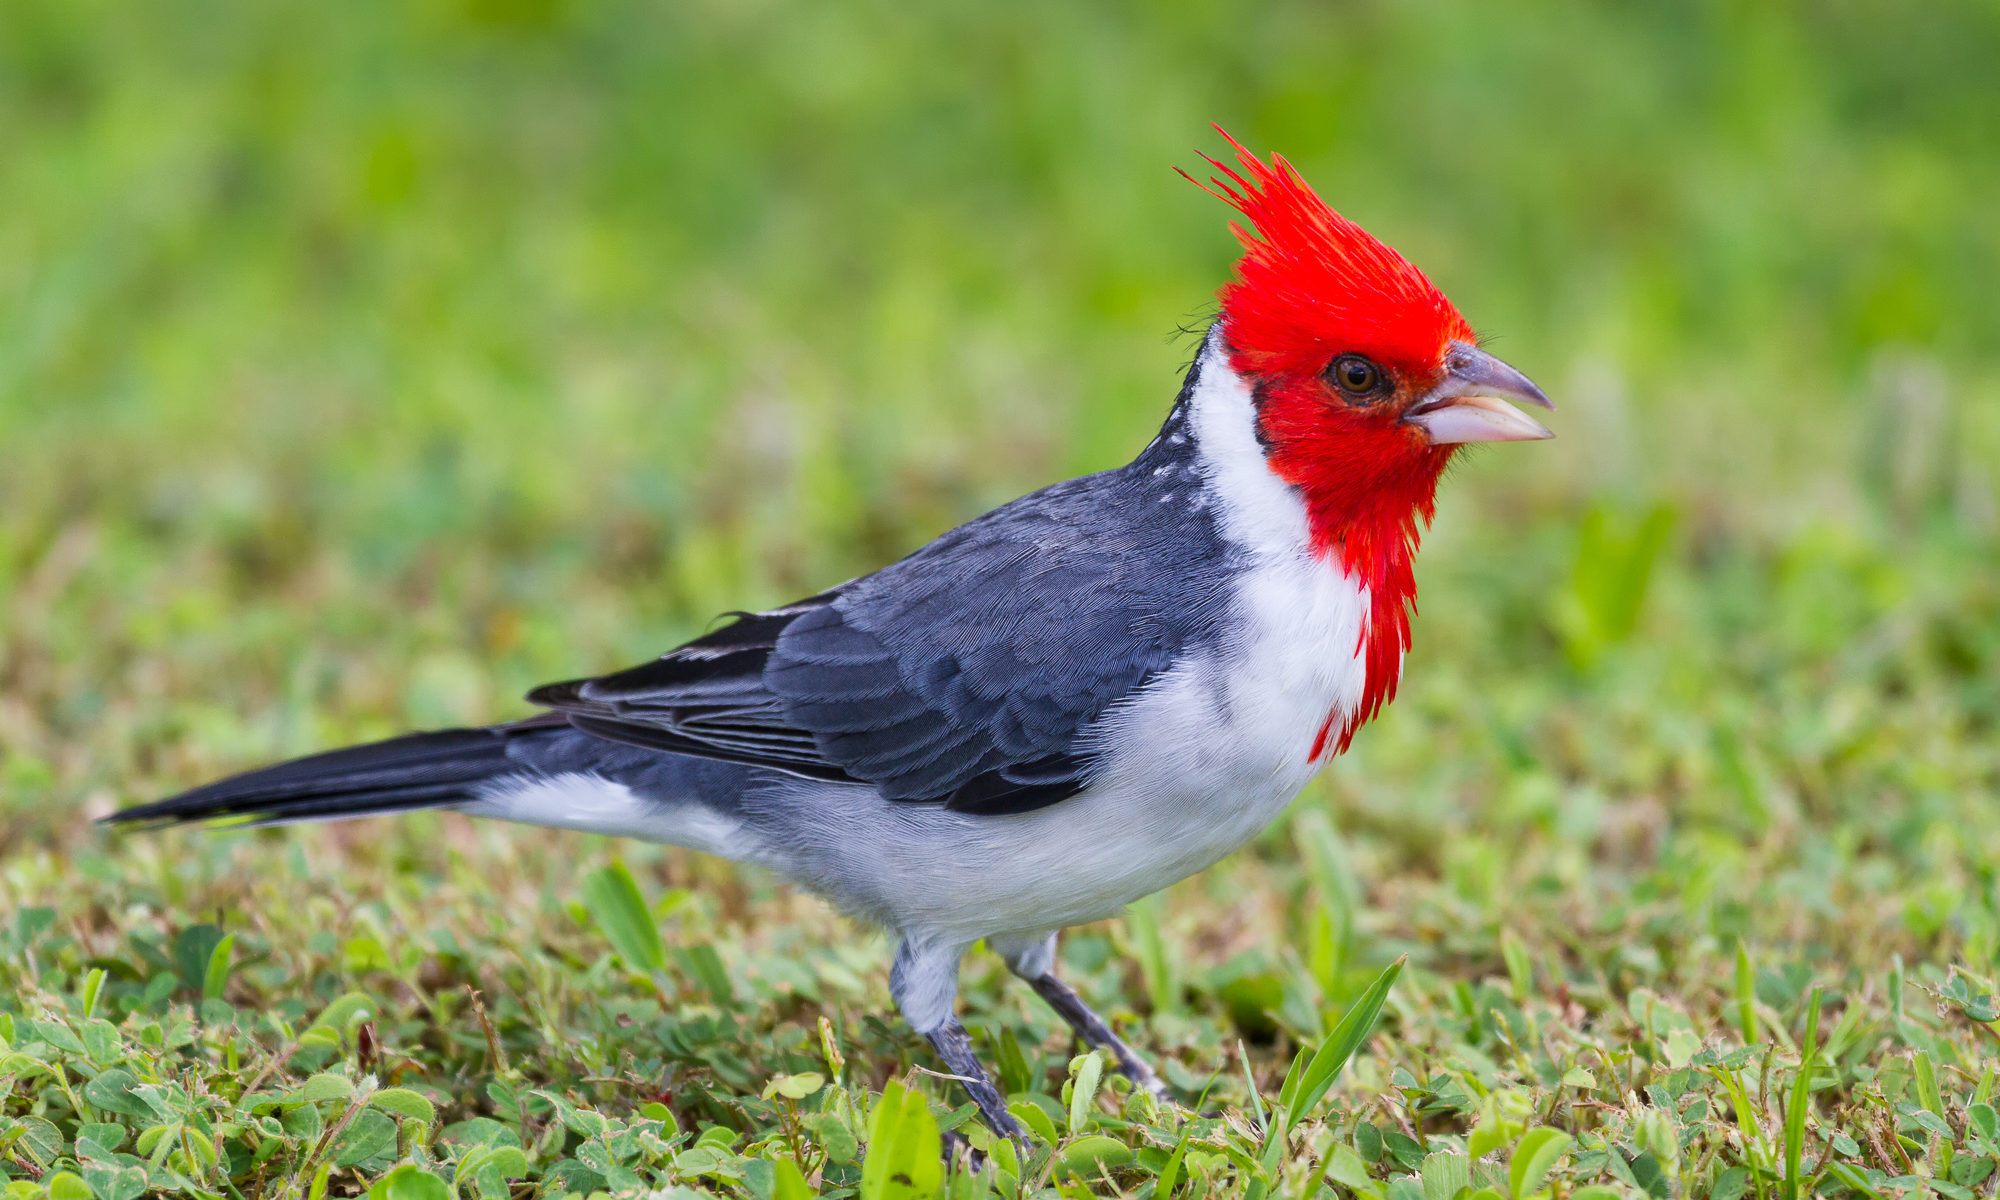 Red-crested cardinal - Wikipedia